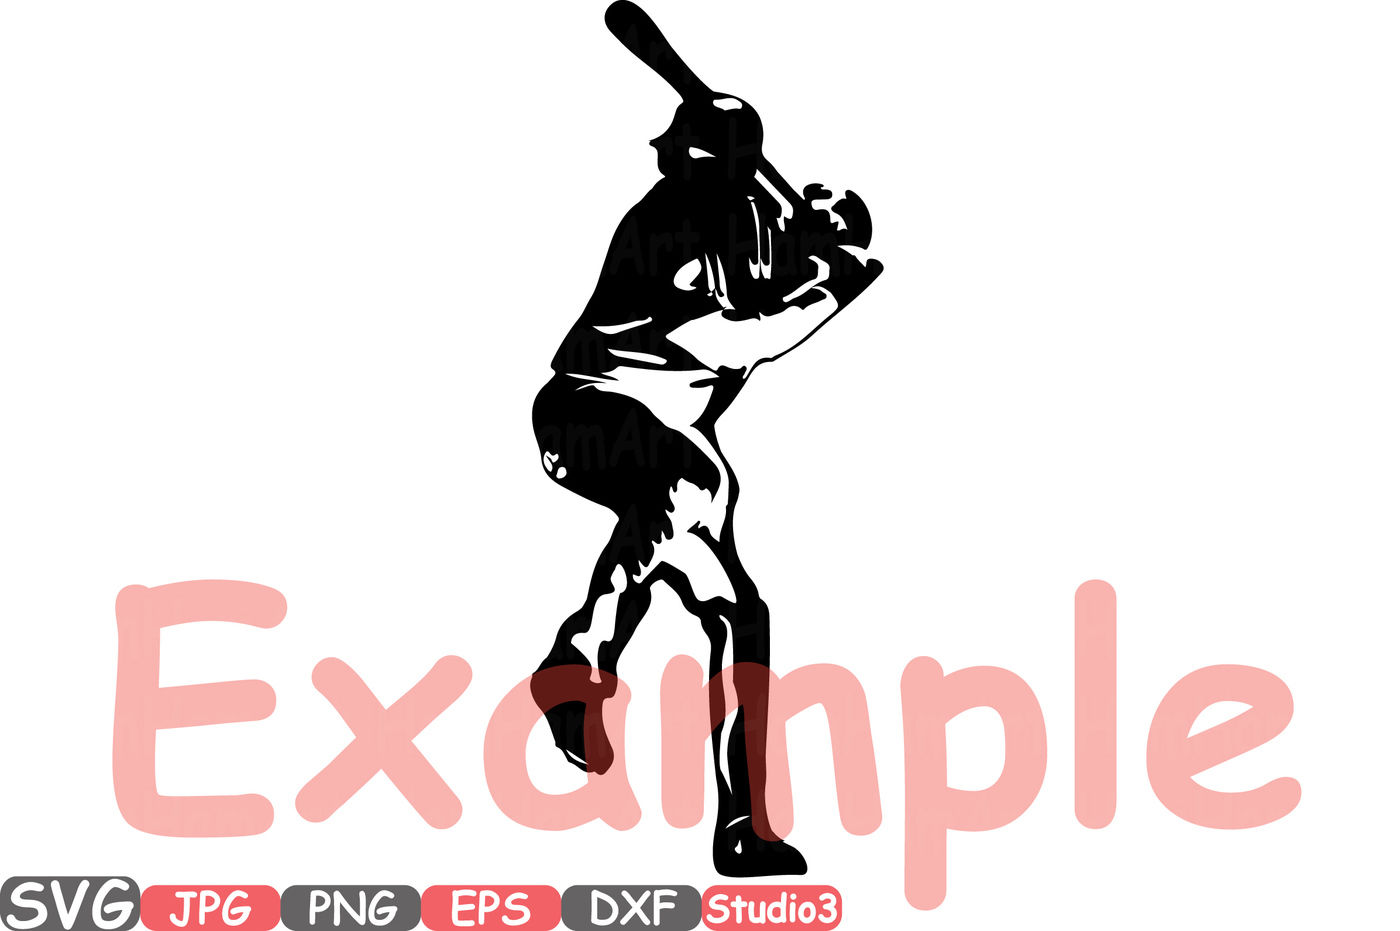 Download Baseball Player SVG Silhouette Cutting Files sign icons ...